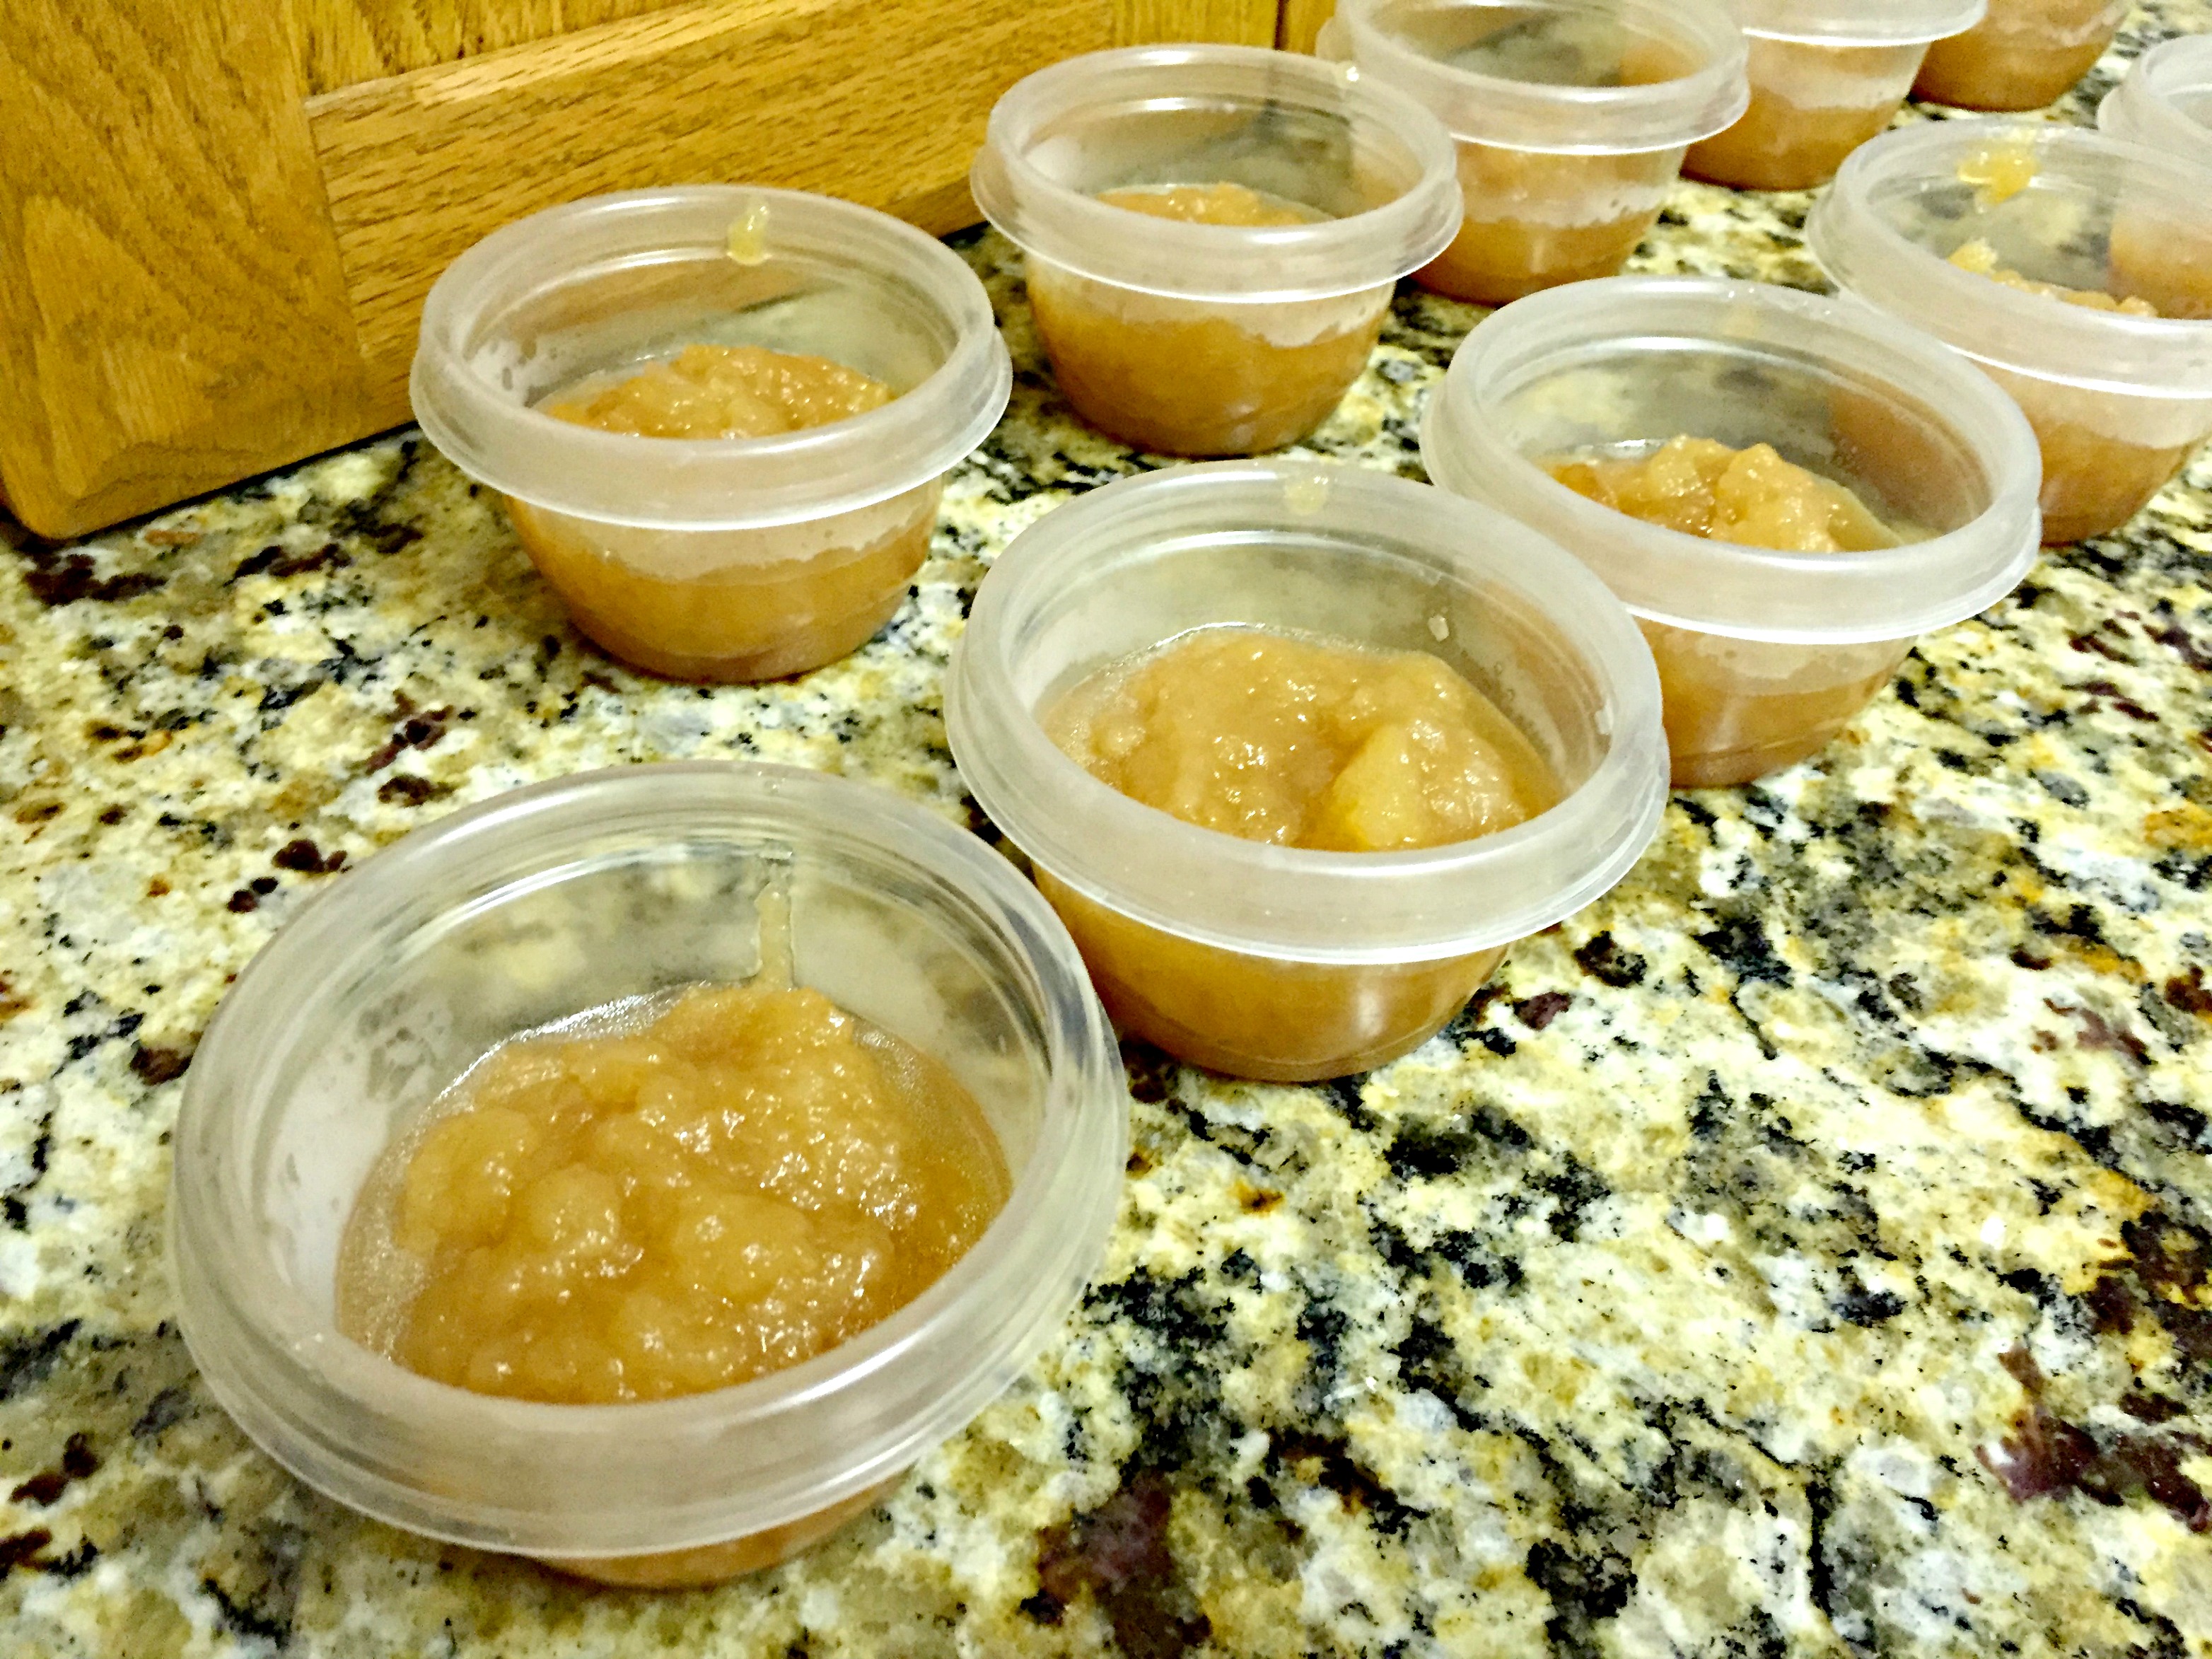 I used these small portion storage containers to divide the applesauce. I froze most of the containers & just pop them in the fridge the day before we want them. Perfect!